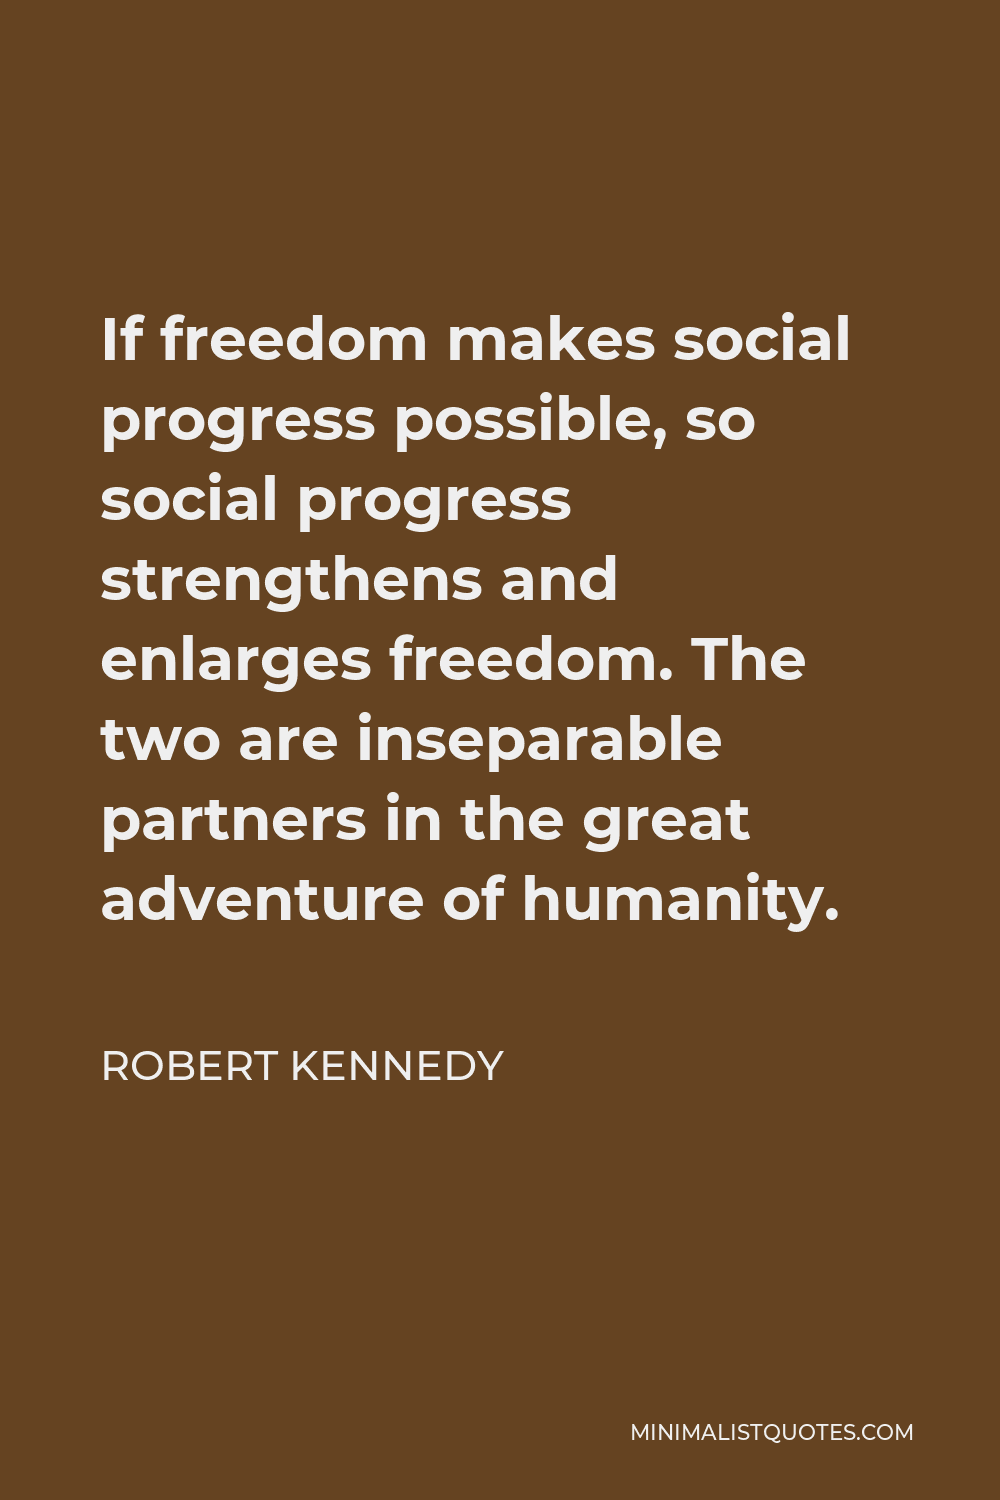 Robert Kennedy Quote - If freedom makes social progress possible, so social progress strengthens and enlarges freedom. The two are inseparable partners in the great adventure of humanity.